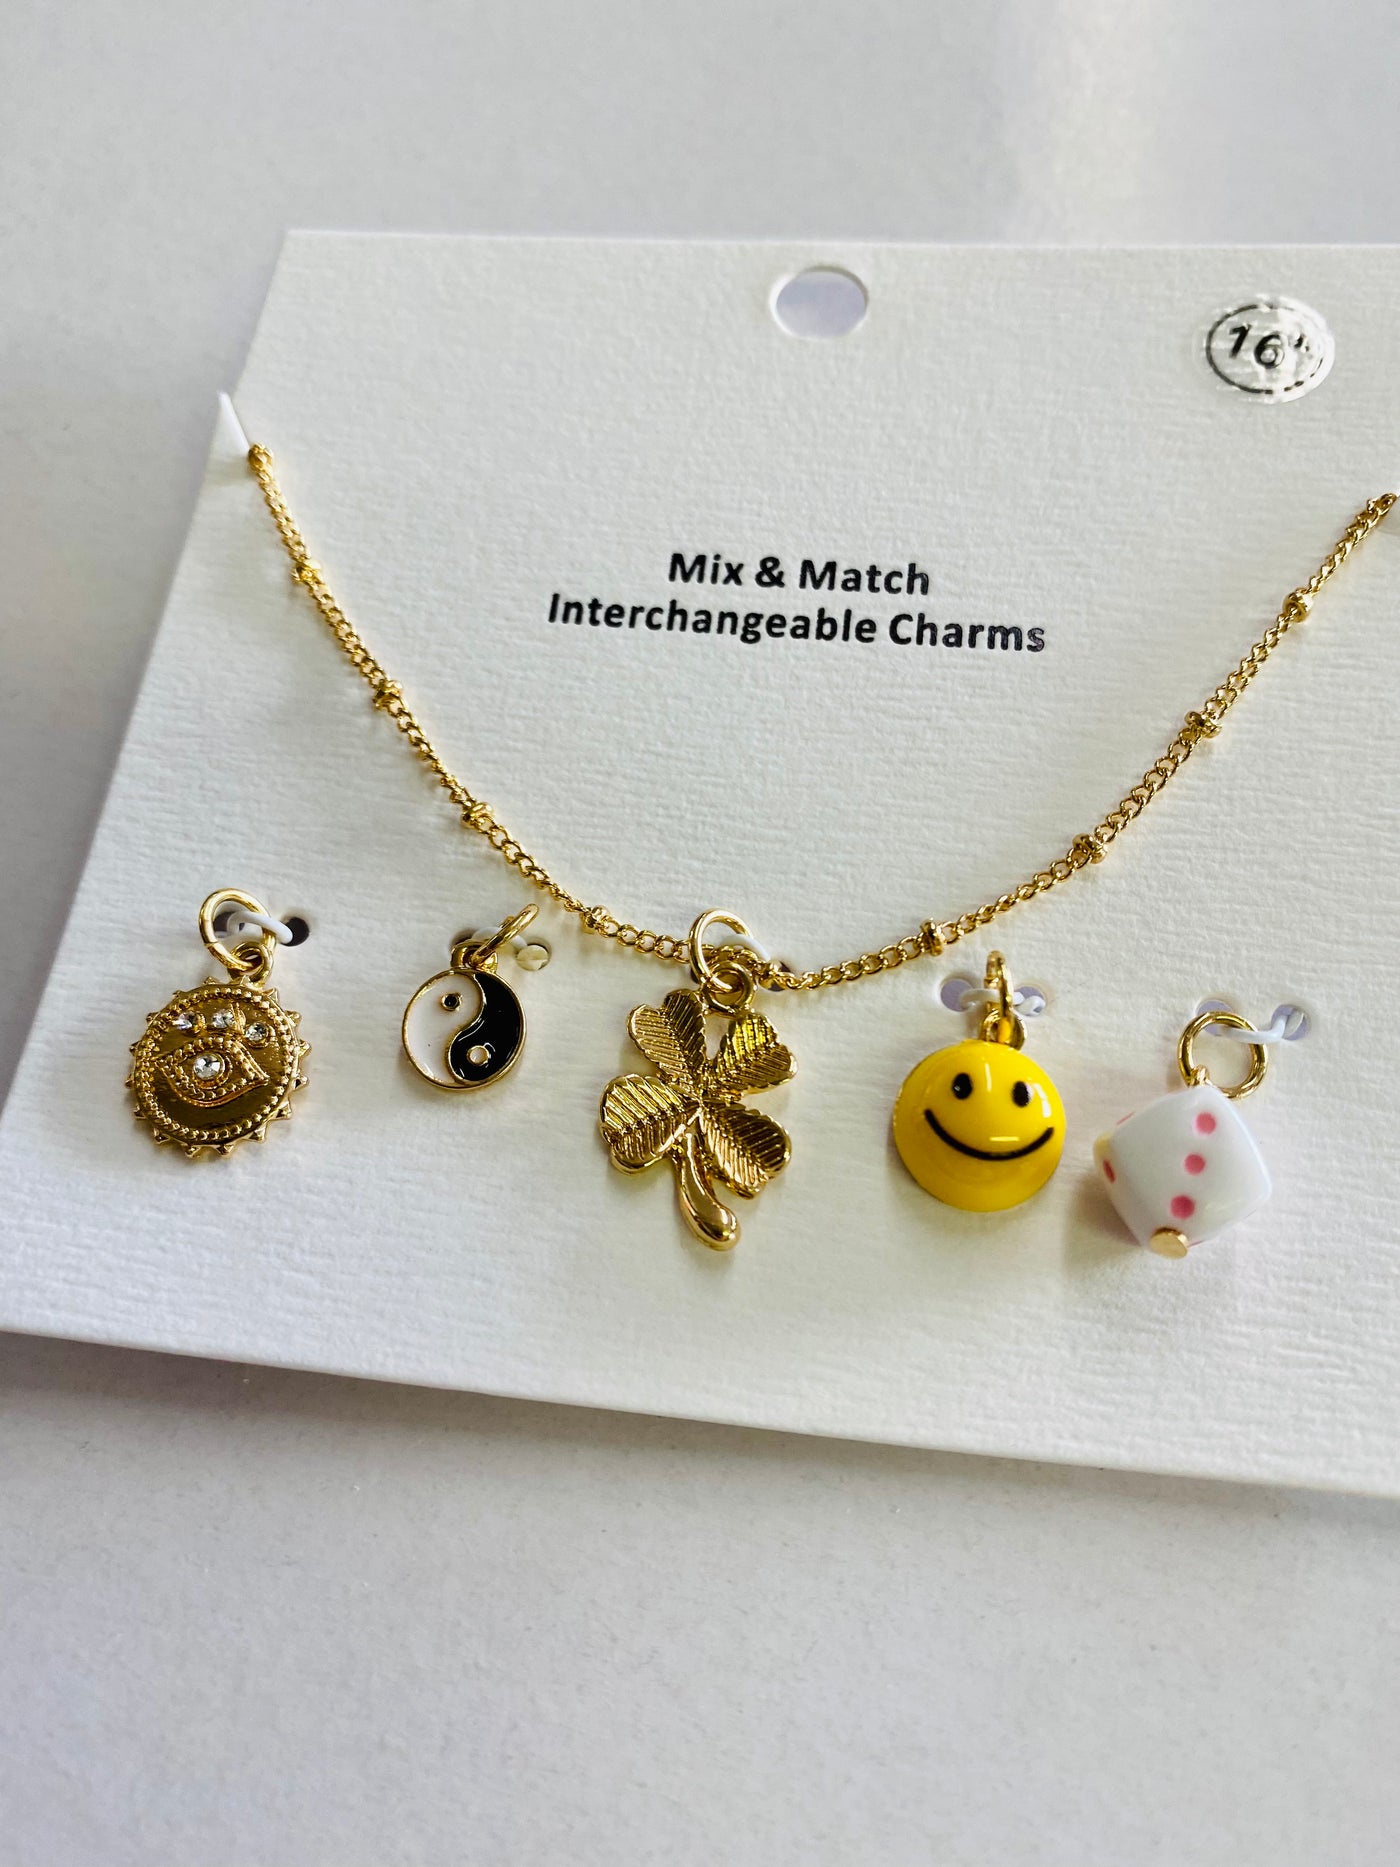 Interchangeable Charms Necklace-Accessories-Anatomy Clothing Boutique in Brenham, Texas